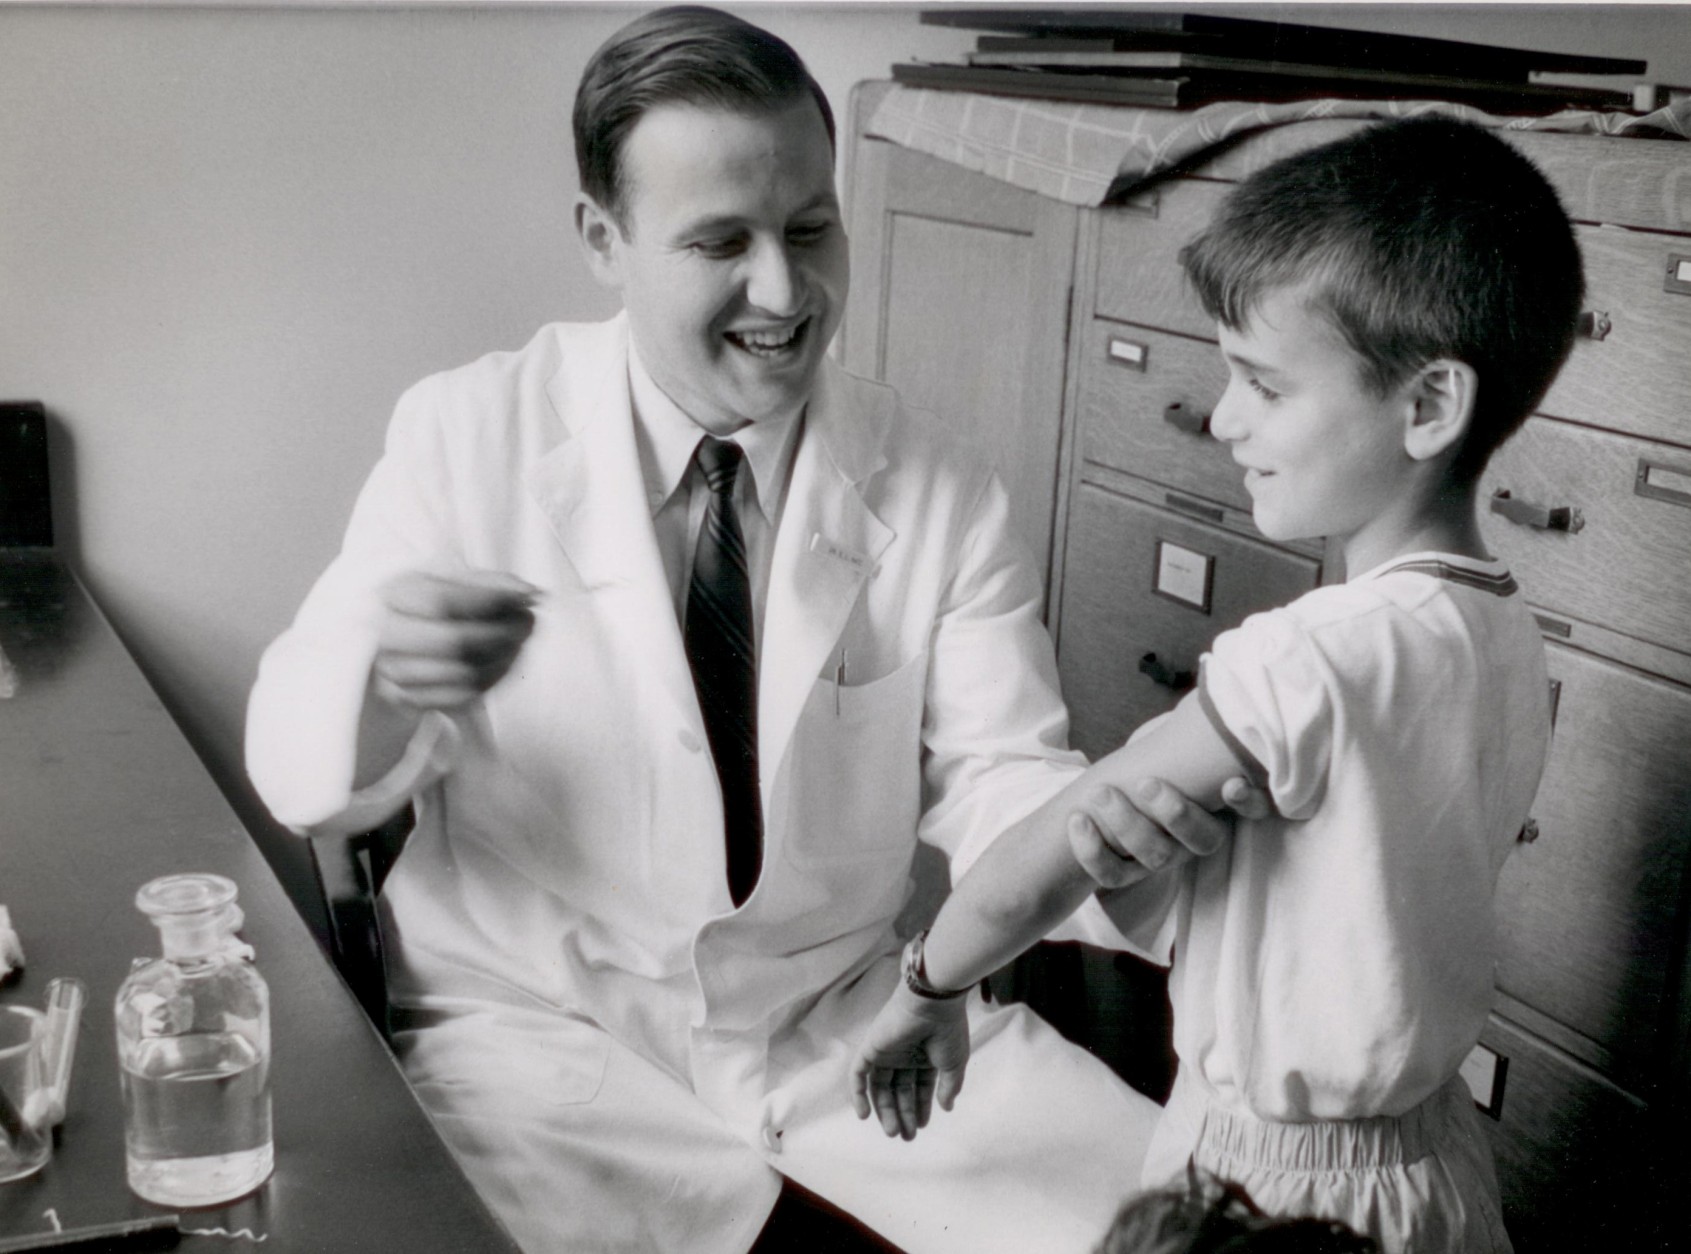 Here, Dr. Samuel Katz injects one of his sons with the measles vaccine.